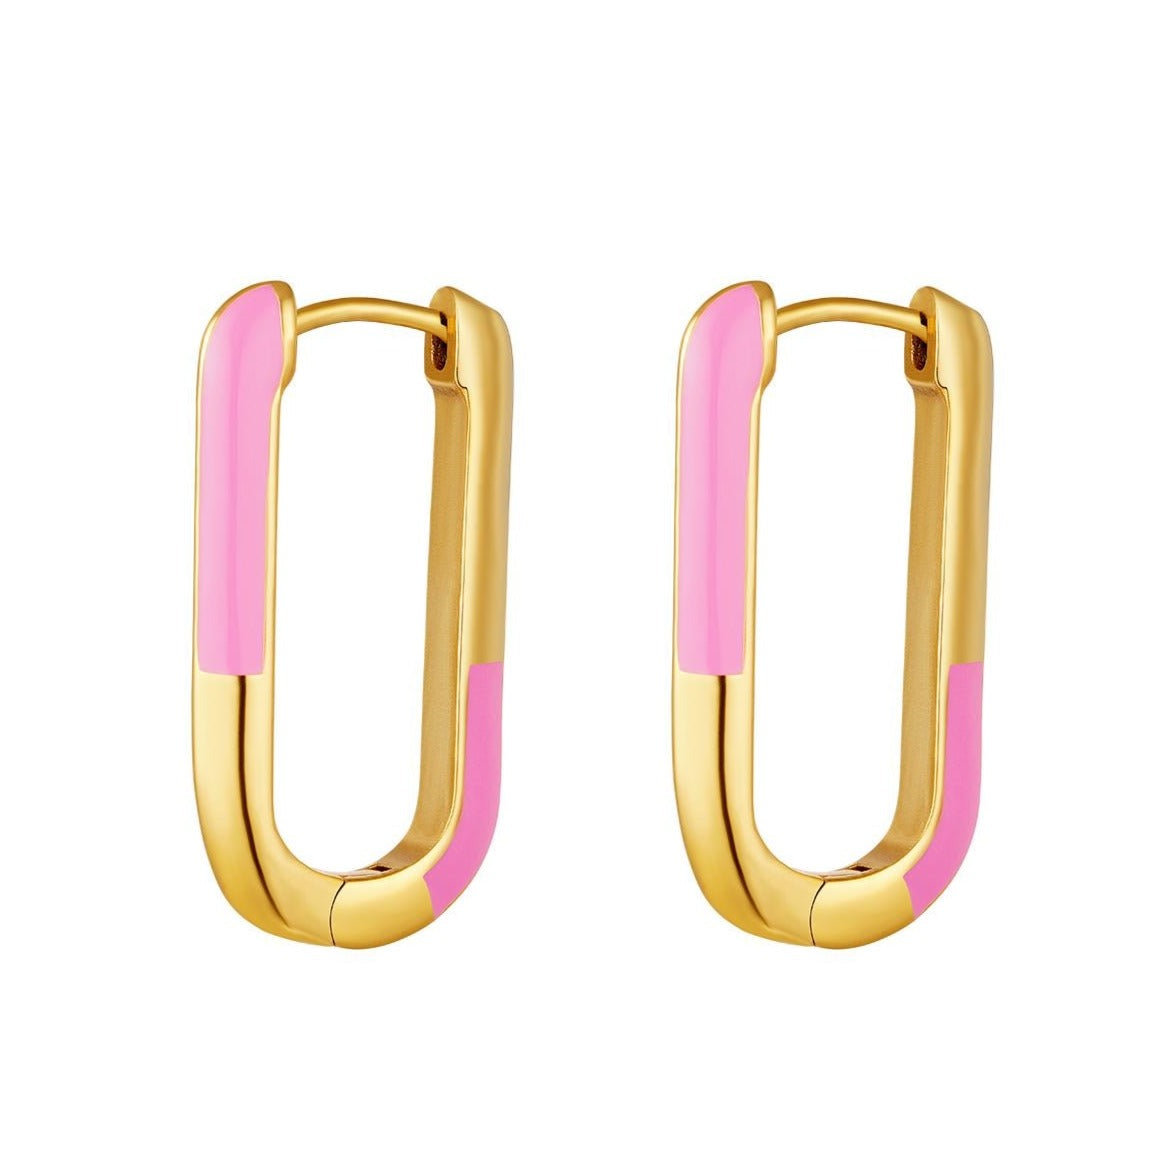 Oval earrings colored